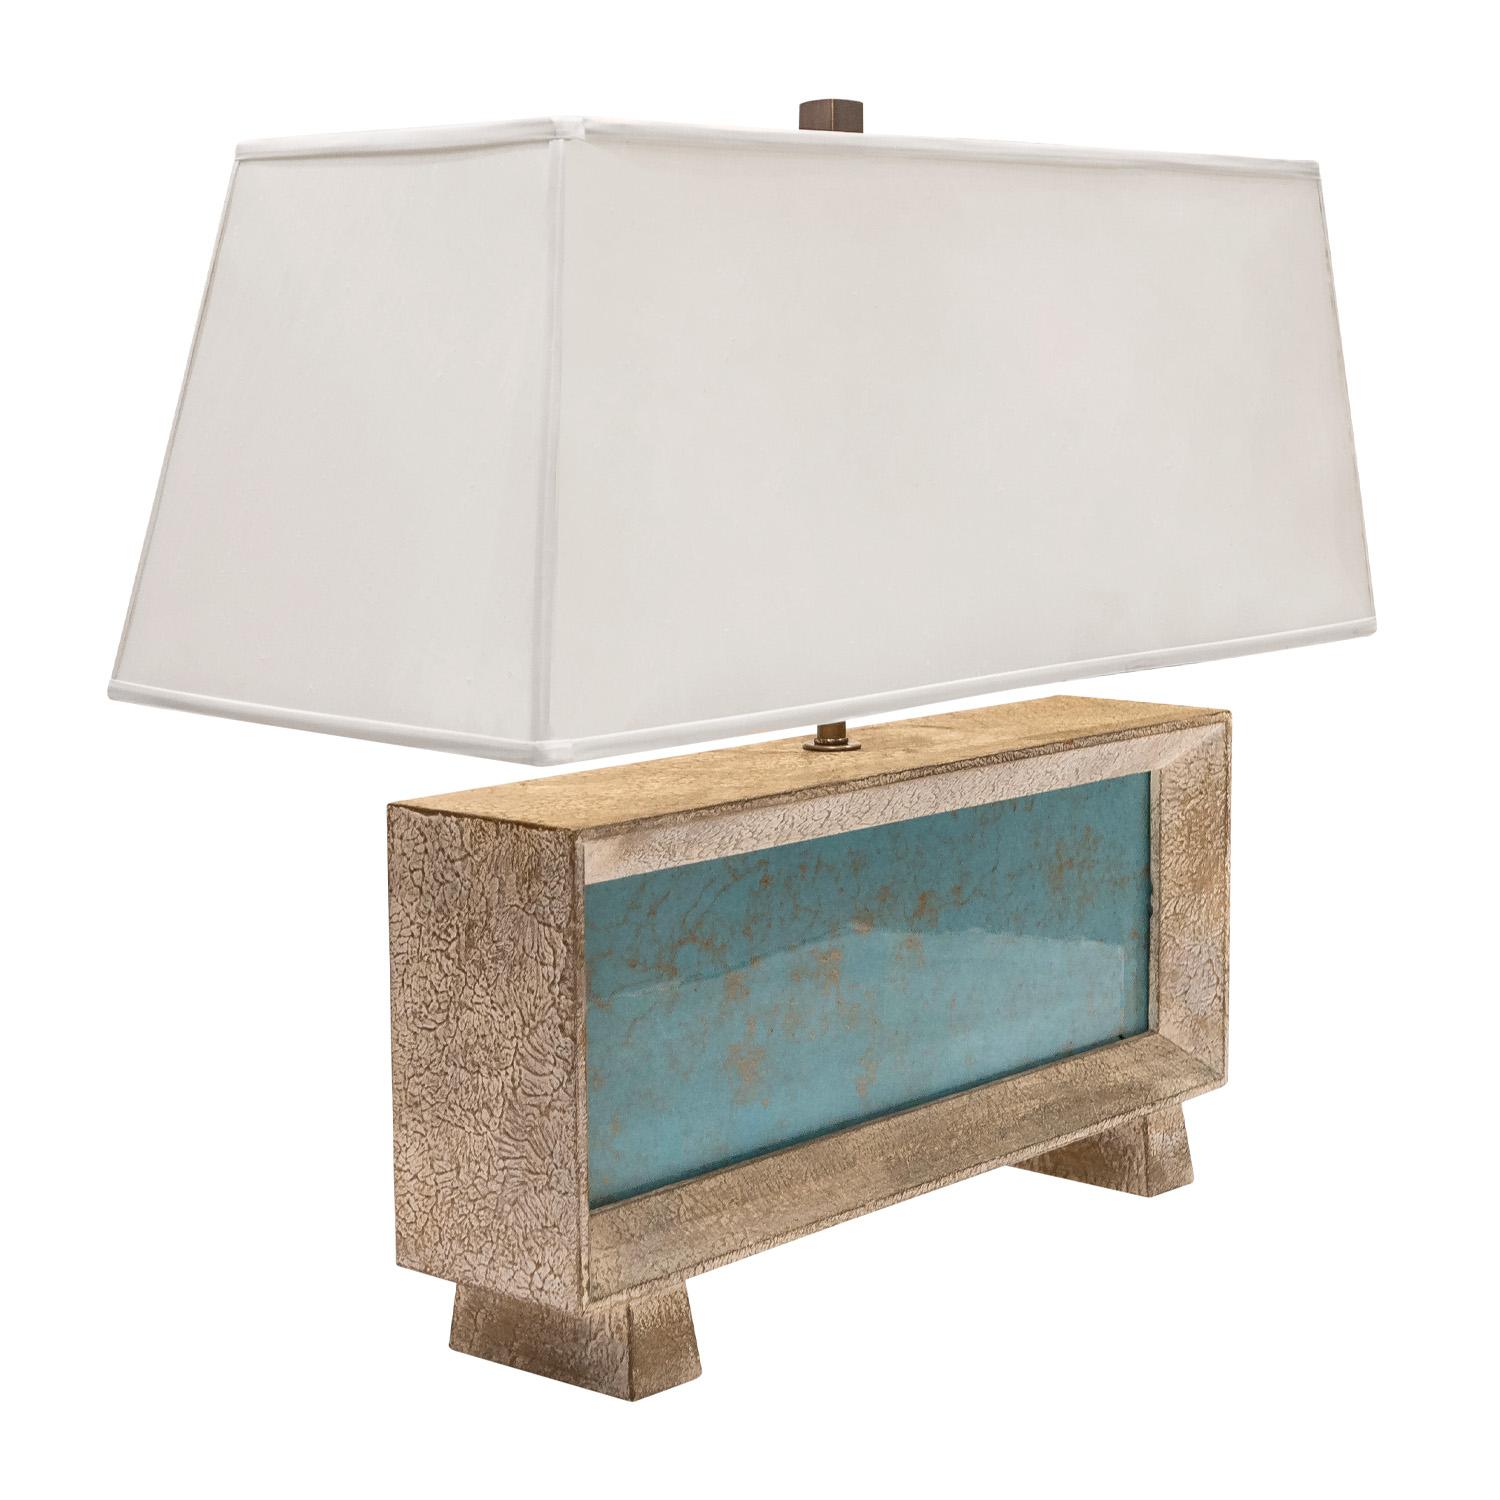 Mid-Century Modern Chic Boxy Table Lamp in Textured Resin with Illuminating Front Panel 1940s For Sale